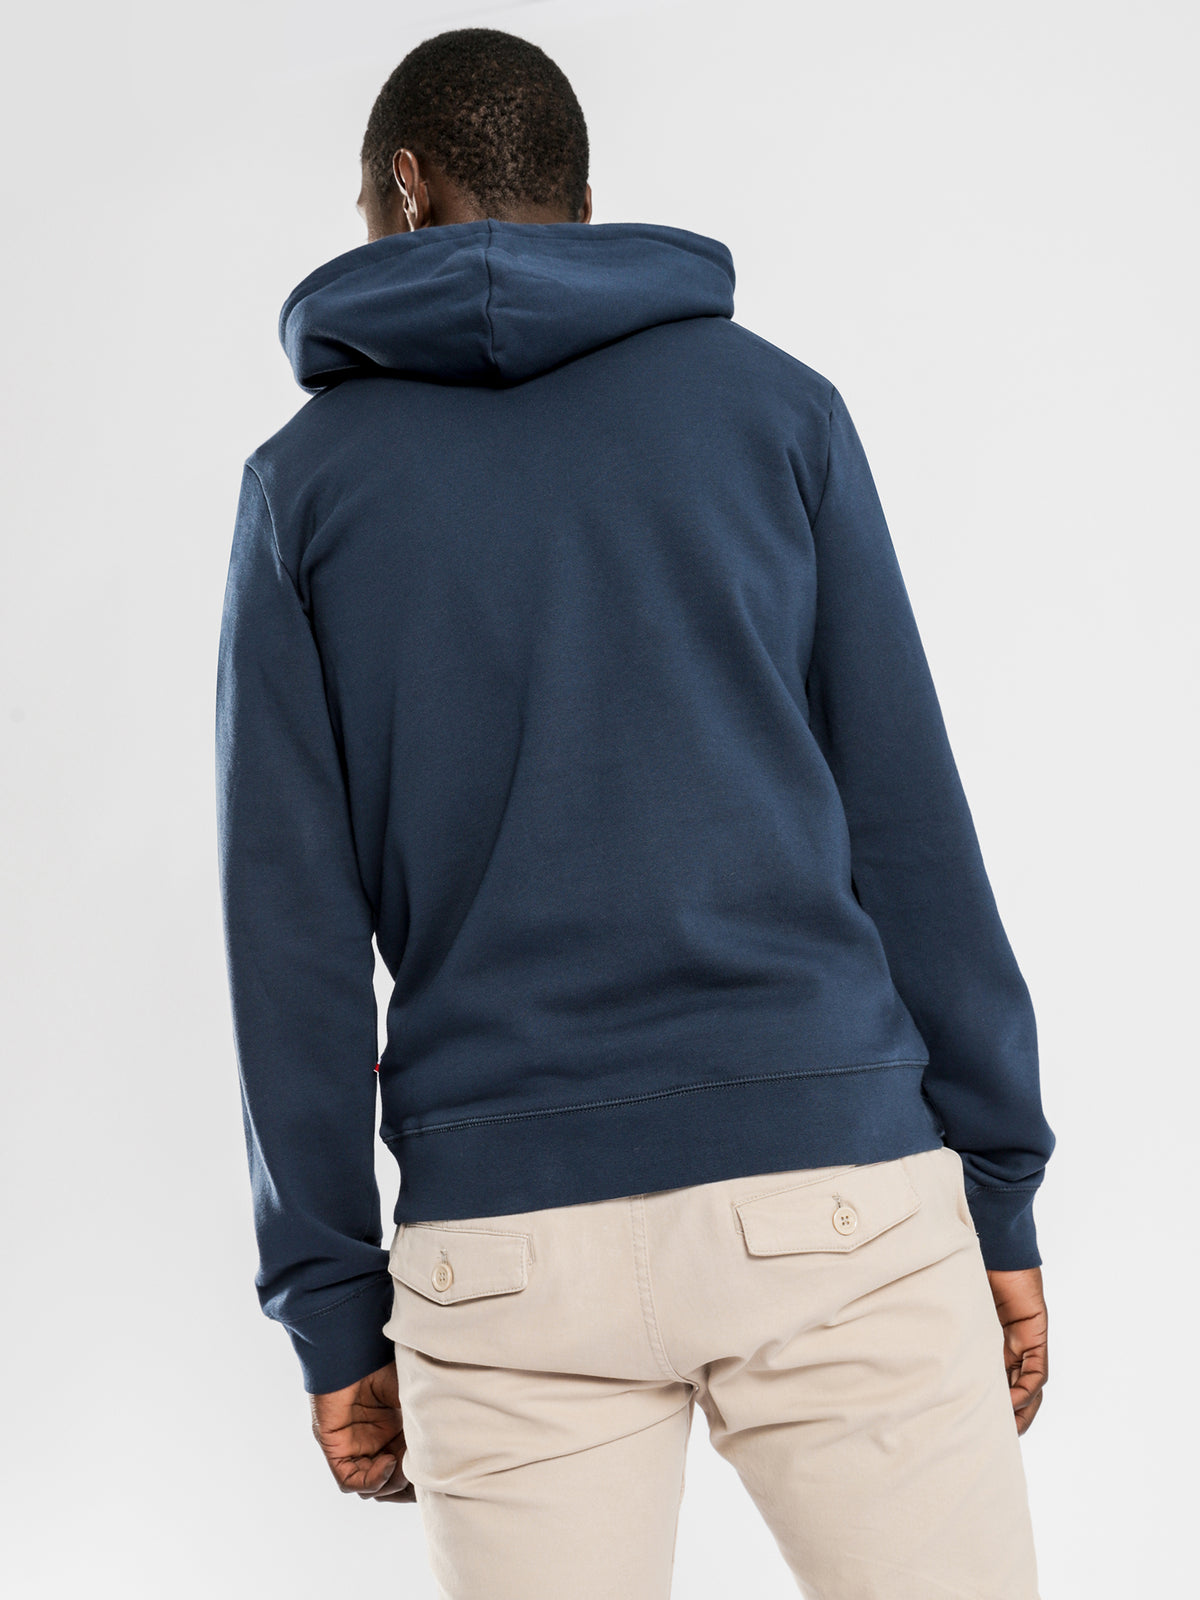 Labrit Hooded Sweater in Navy